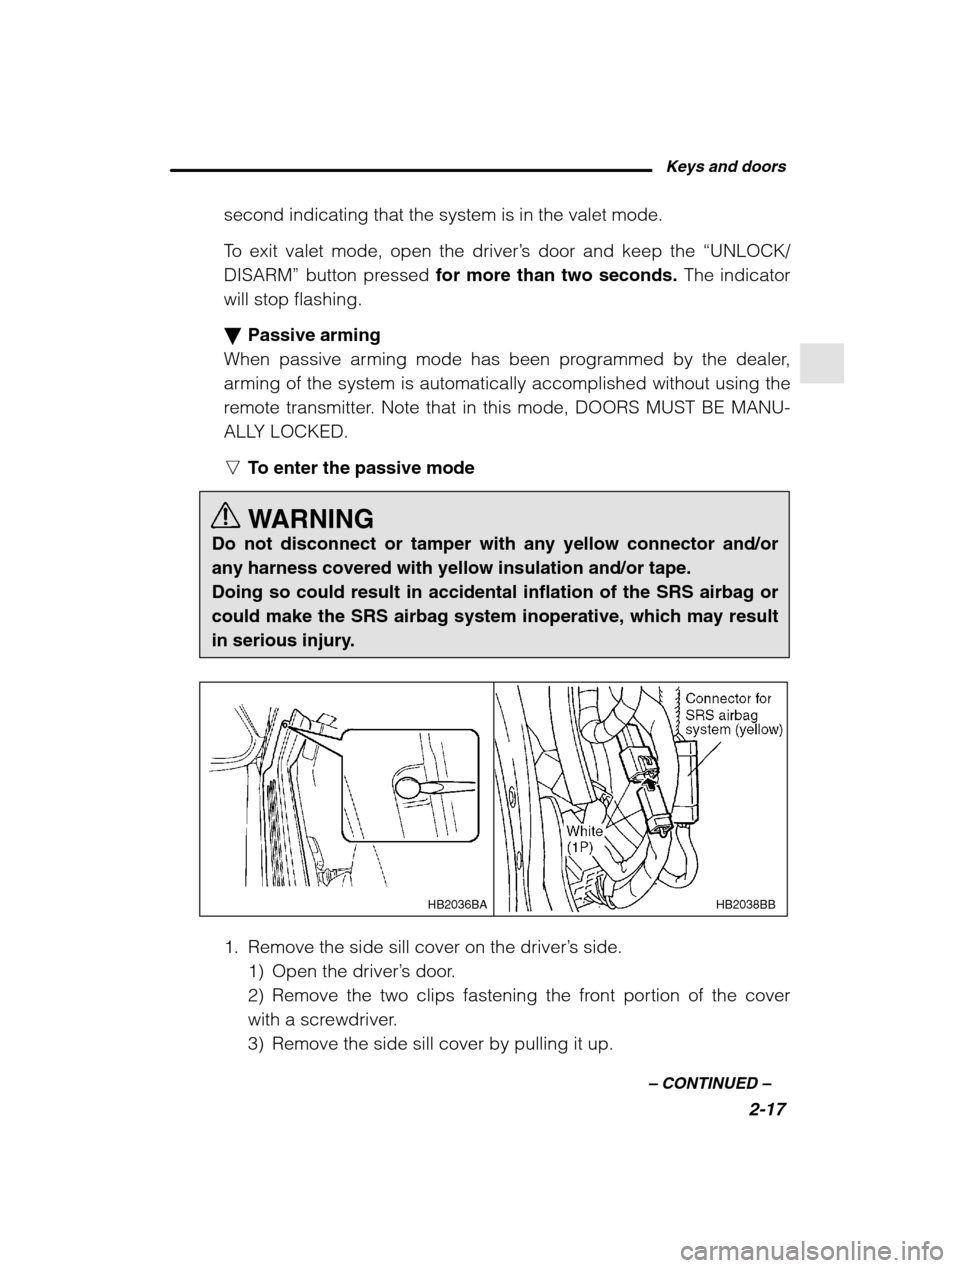 SUBARU LEGACY 2002 3.G Owners Manual Keys and doors2-17
–
 CONTINUED  –
second indicating that the system is in the valet mode. 
To exit valet mode, open the driver ’s door and keep the  “UNLOCK/
DISARM”  button pressed  for mo